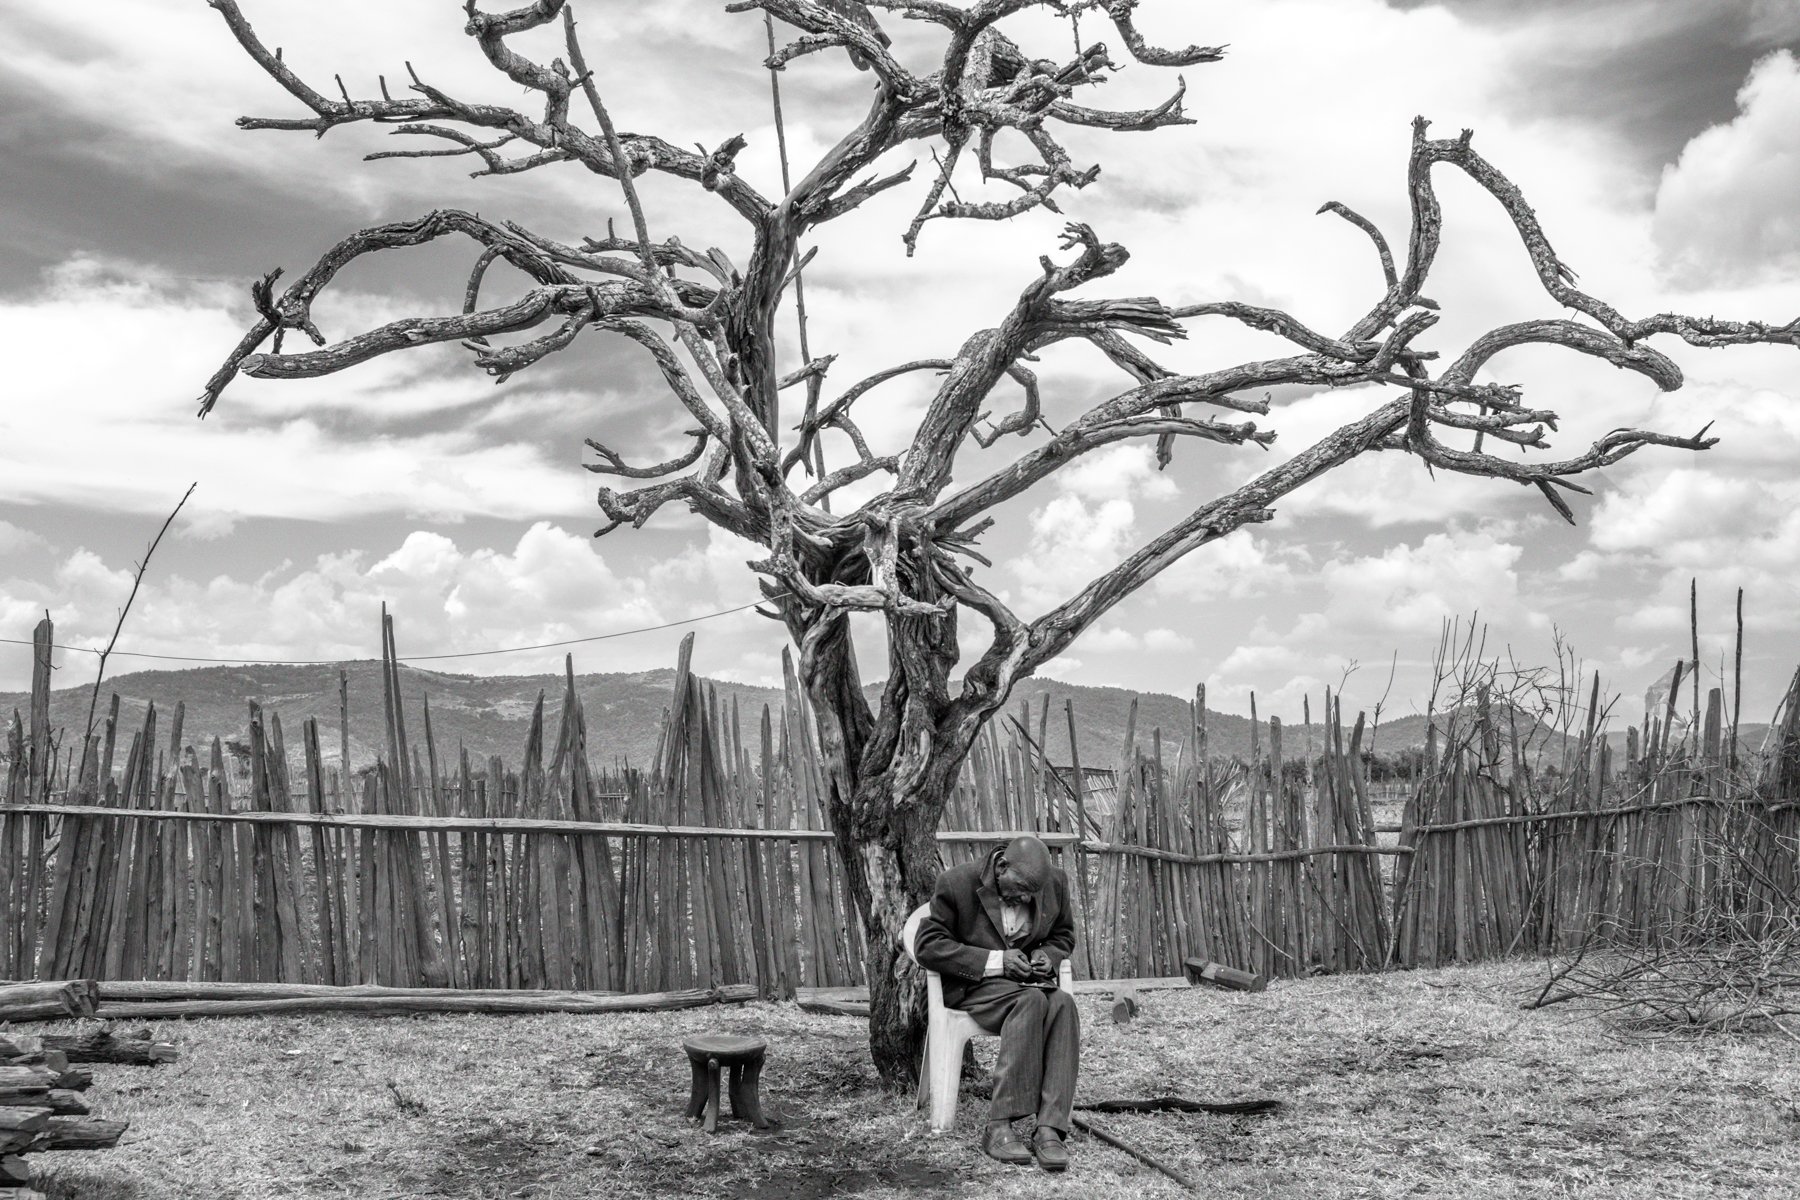  John Kisio, 82 years, sits under a tree in his homestead. “I have nowhere to go. If I die, I want to die on my land”. Nadumoro village, Laikipia county, Kenya. 